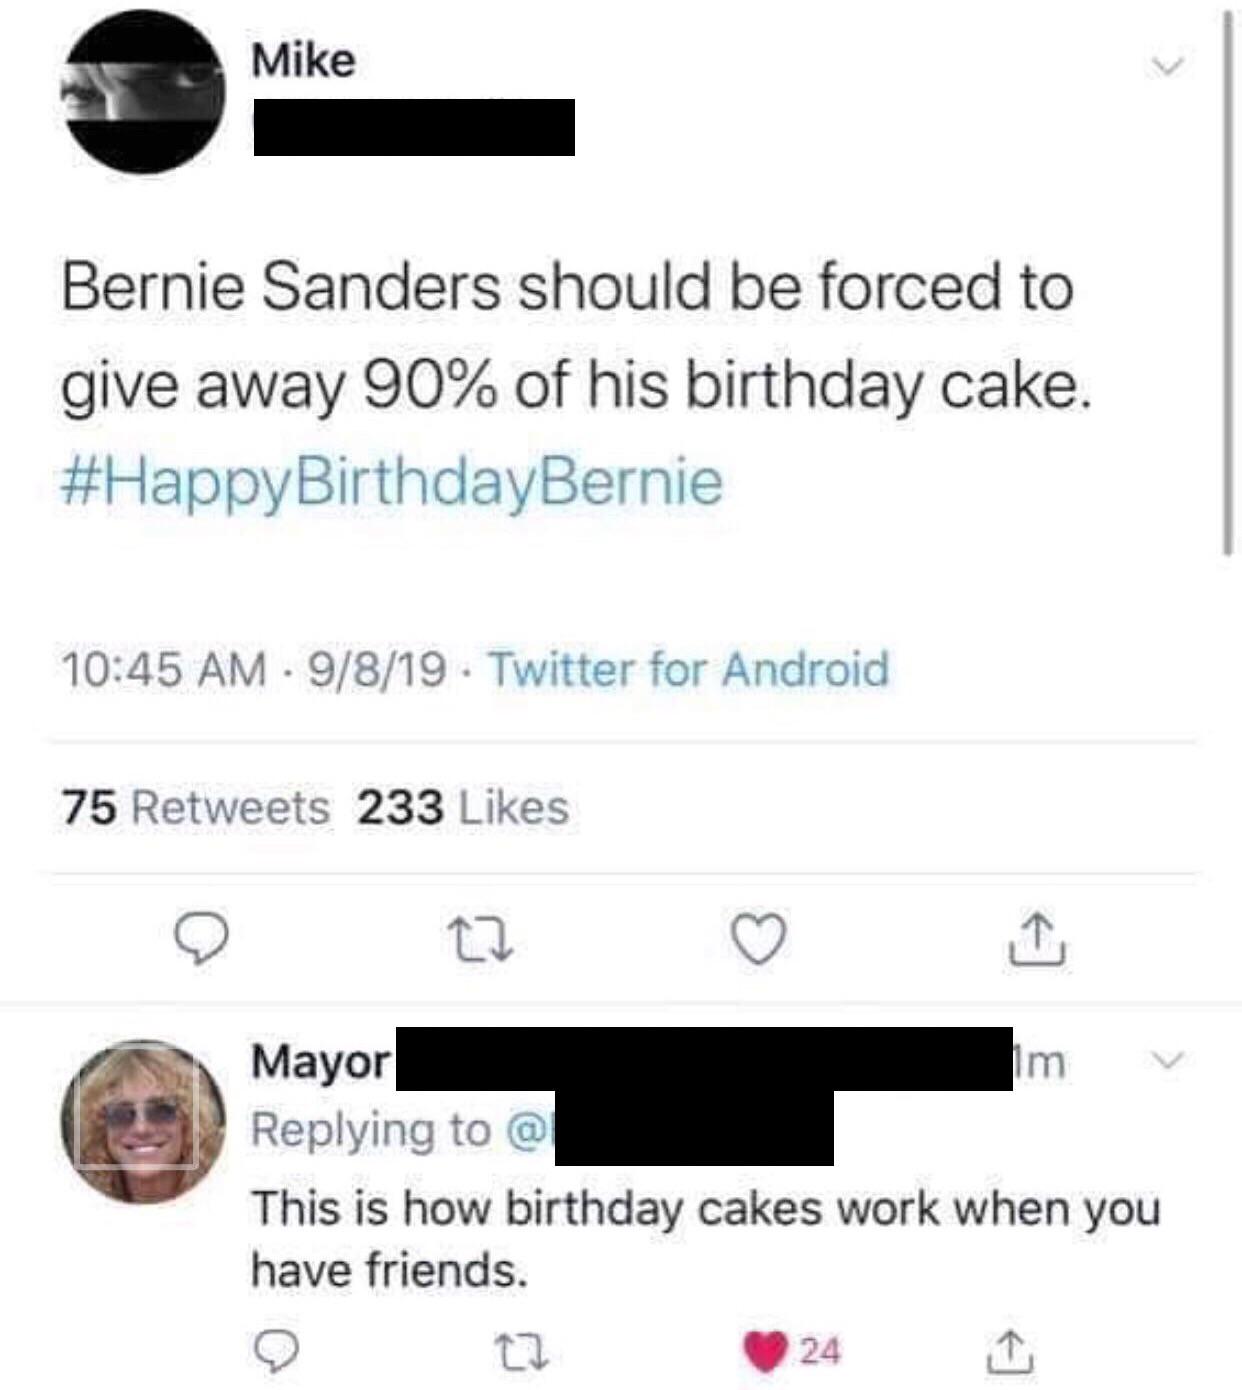 The cake isn't just for you, Mike...